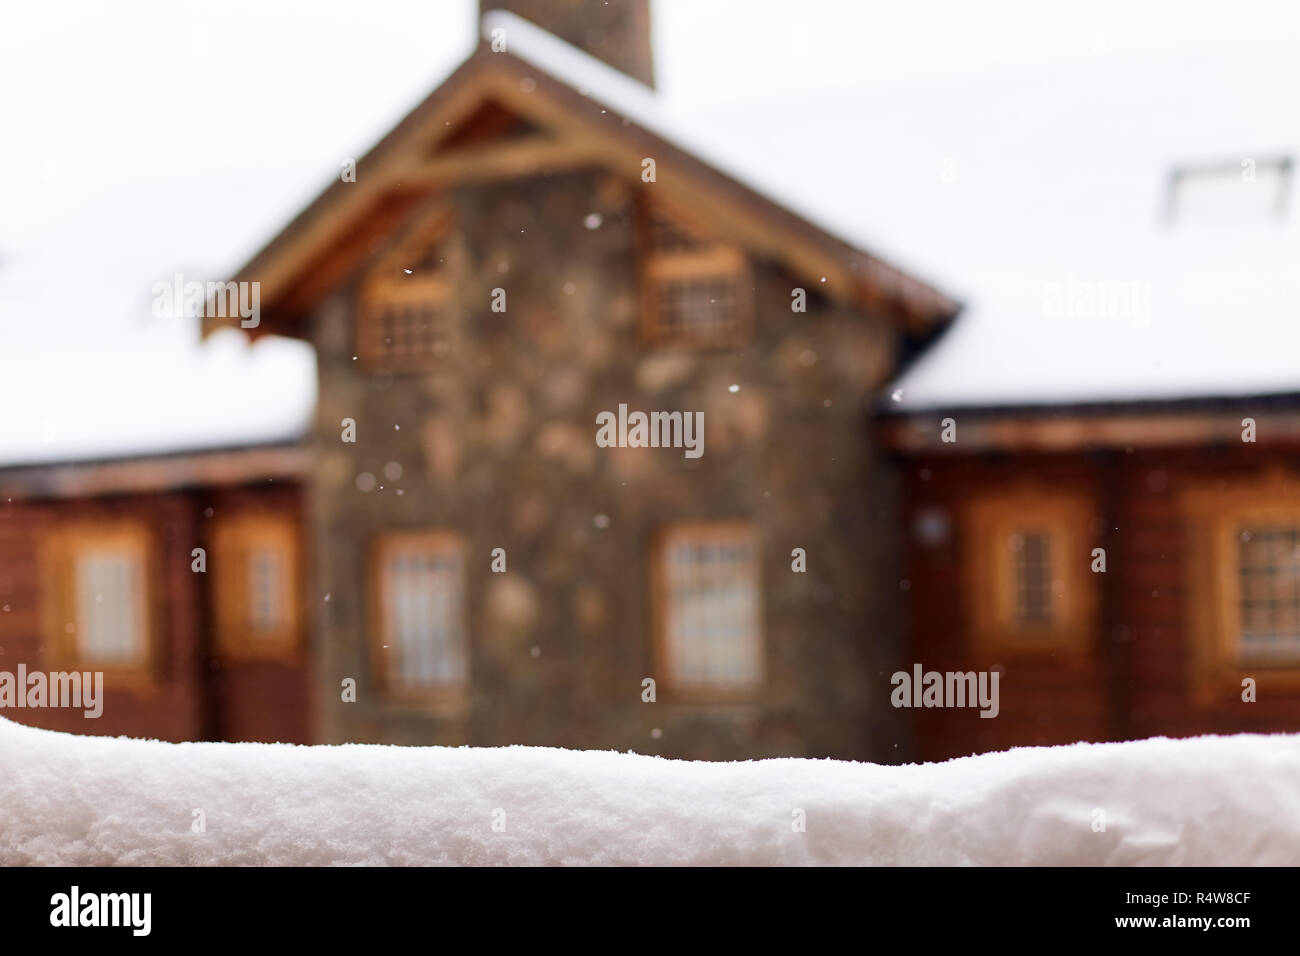 Snow-covered surface for product placement. Blurred house made of wood and stone on background. Snowfall on winter day. Christmas background with wooden cottage or chalet at ski resort. Copyspace. Stock Photo